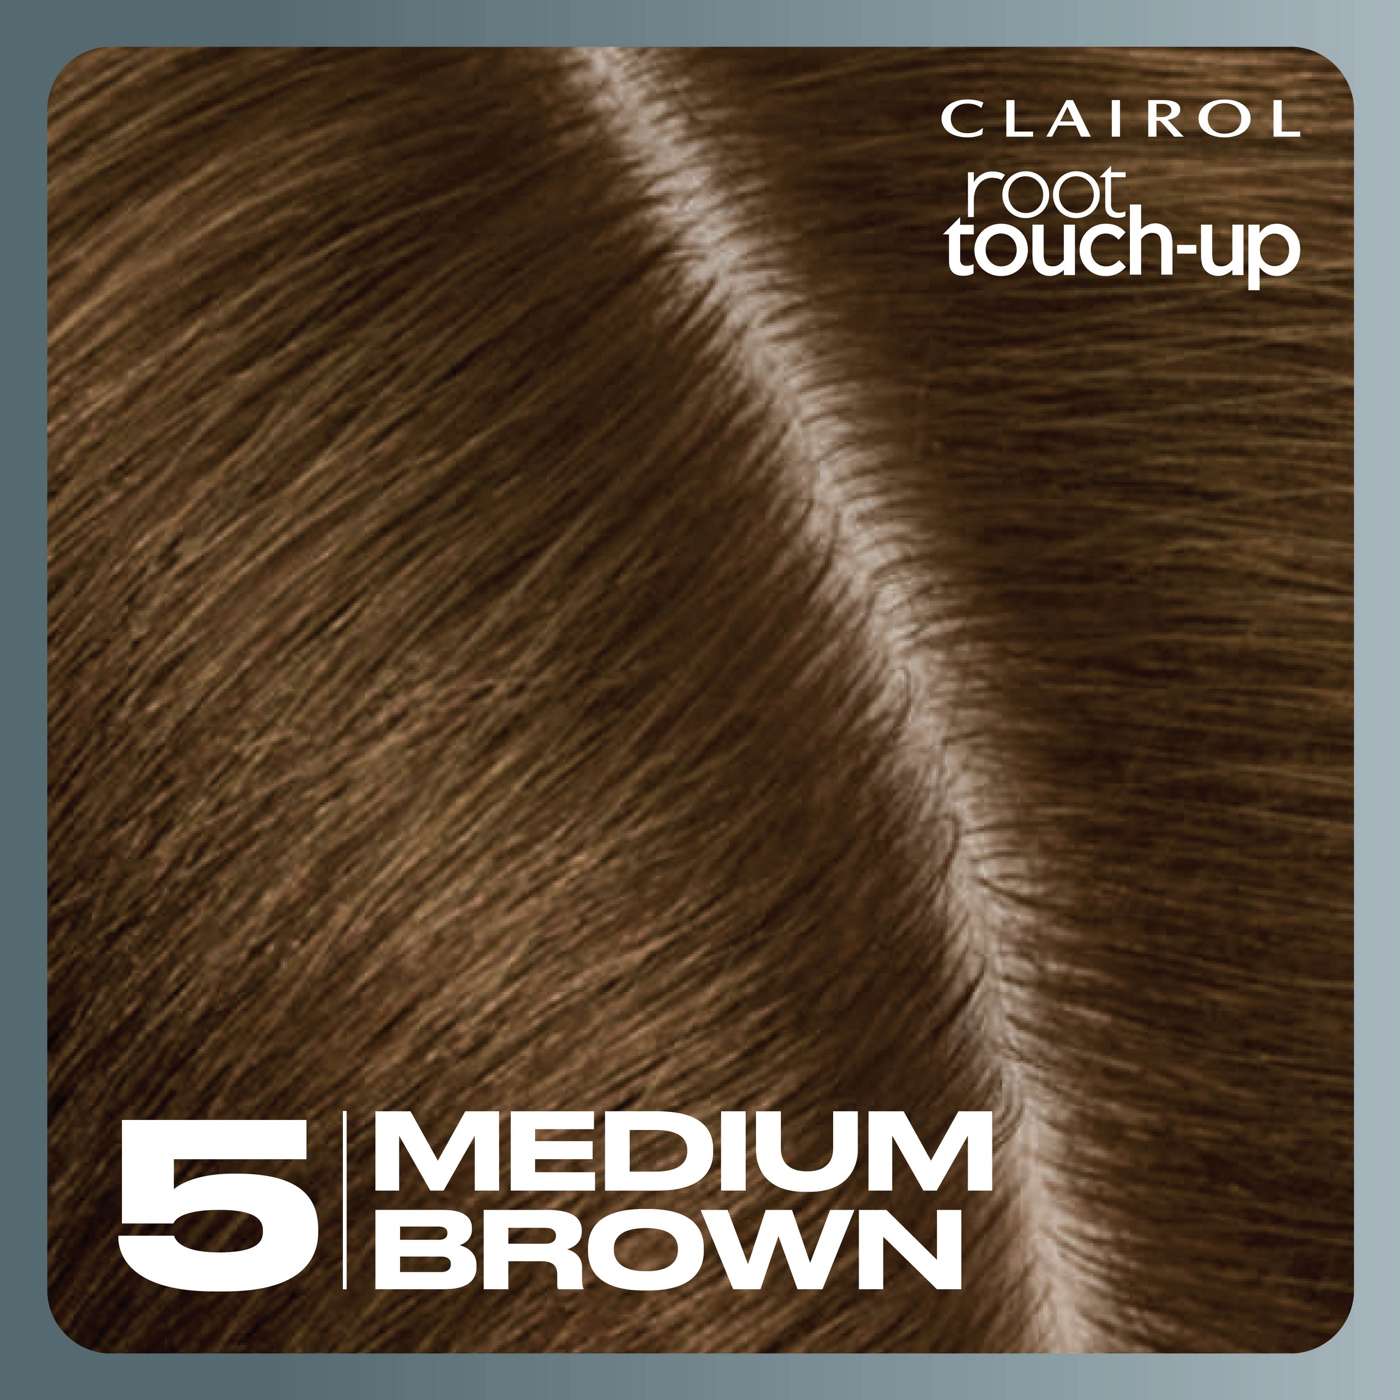 Clairol Nice 'N Easy Permanent Root Touch-Up - 5 Medium Brown; image 10 of 10